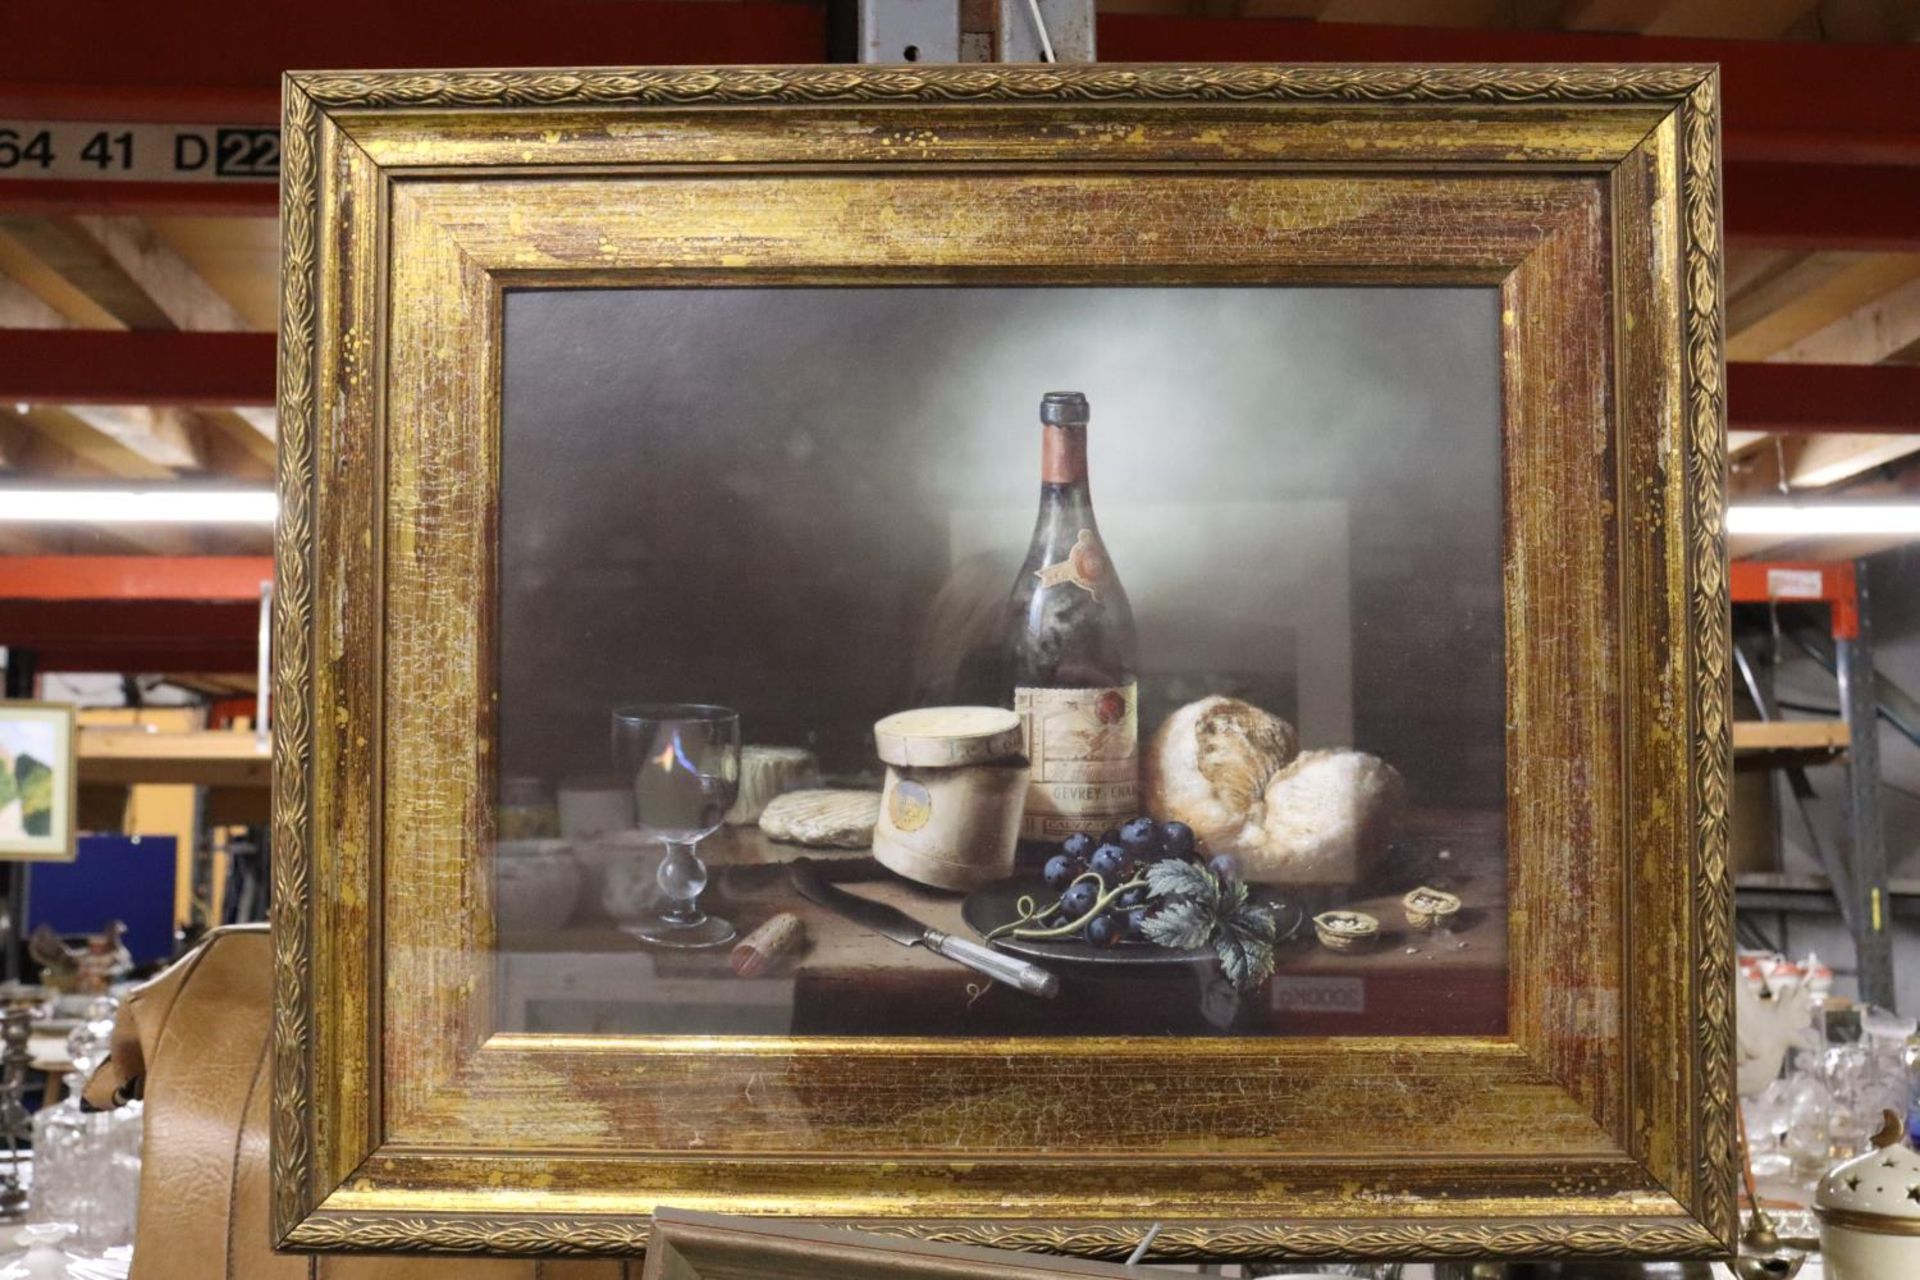 A FRAMED PRINT OF A STILL LIFE "WINE, CHEESE AND FRUIT" SCENE